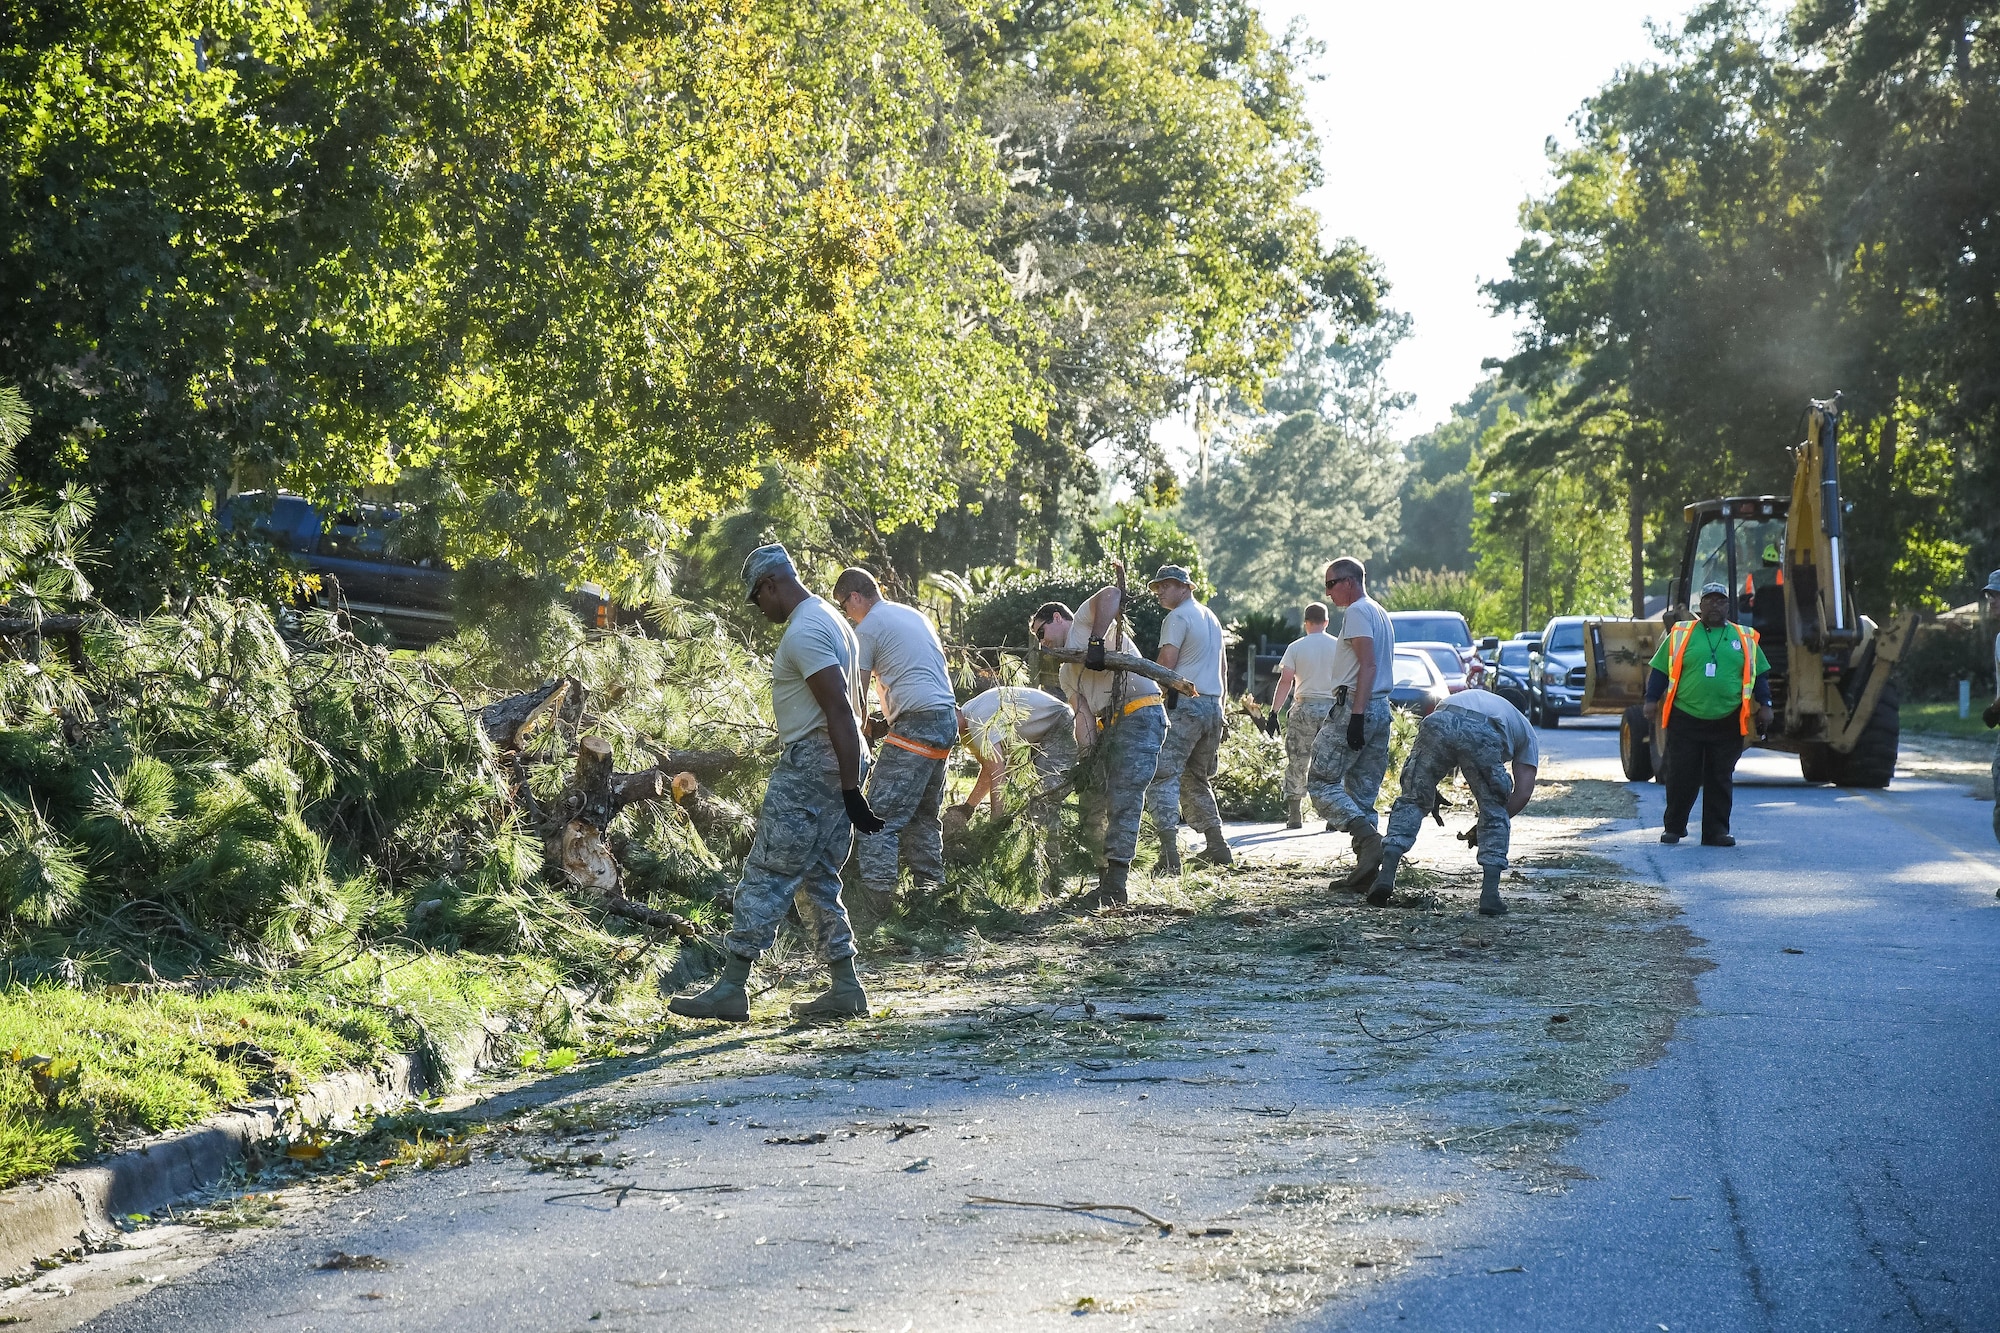 Citizen Airmen from 116th Air Control Wing (ACW), Georgia Air National Guard, along with workers from Chatham County Public Works, clear fallen trees from roadways in the aftermath of Hurricane Matthew, Savannah, Ga., Oct. 9, 2016. The Airmen from the 116th ACW deployed to Savannah to support civil authorities, are working along side the Chatham County Public Works department to assist in road clearing and debris cleanup operations. (U.S. Air National Guard photo by Senior Master Sgt. Roger Parsons)